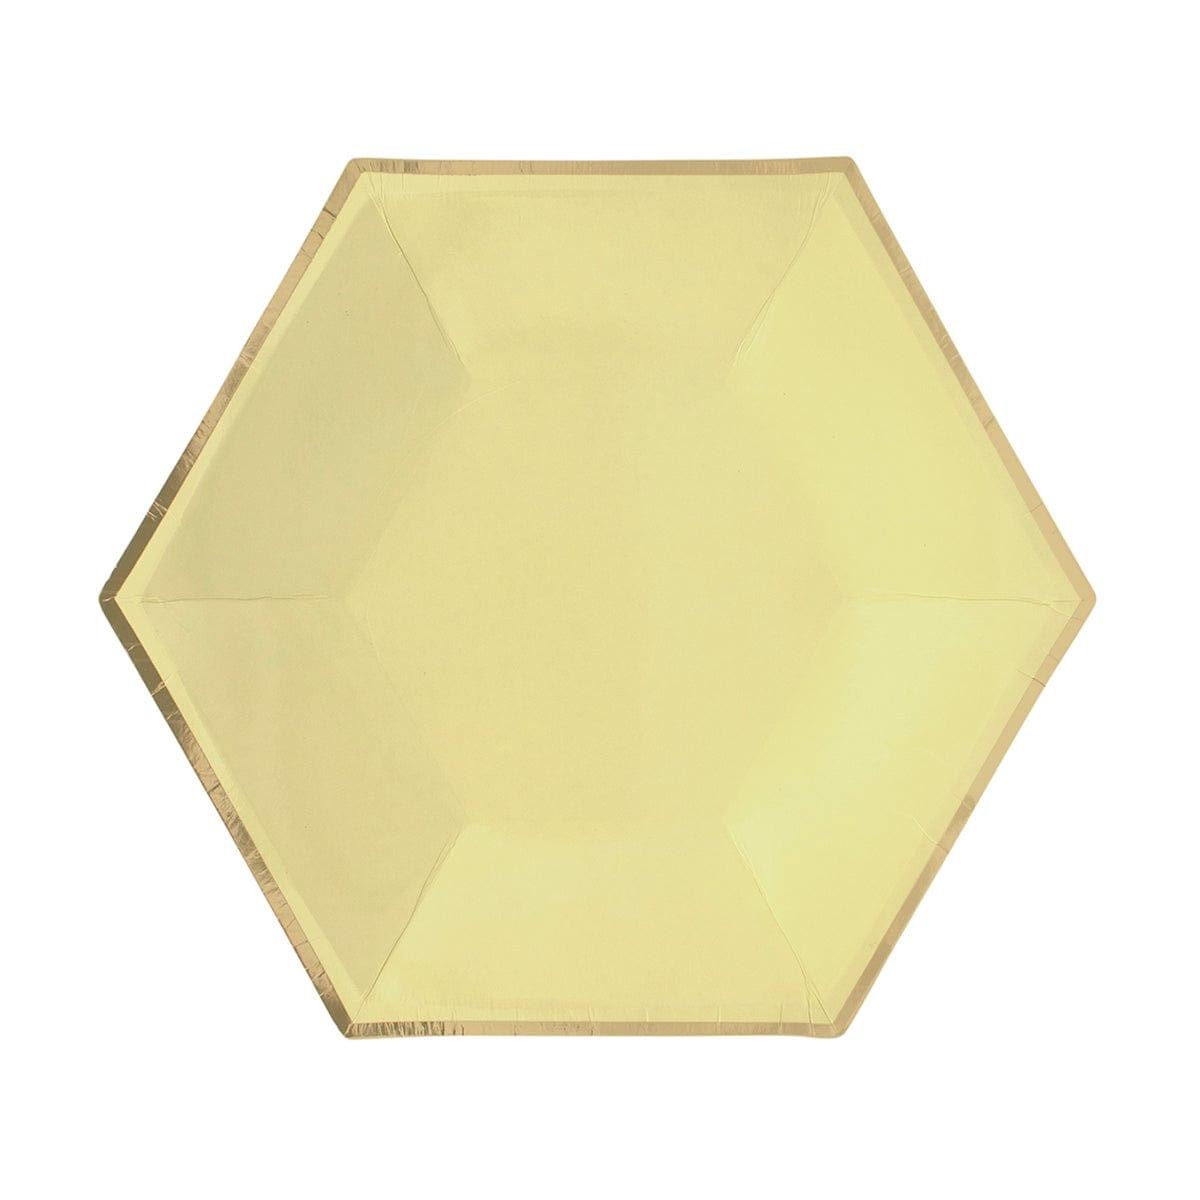 YIWU SANDY PAPER PRODUCTS CO., LTD Everyday Entertaining Hexagon Yellow Plates, 9 Inches, 8 Count